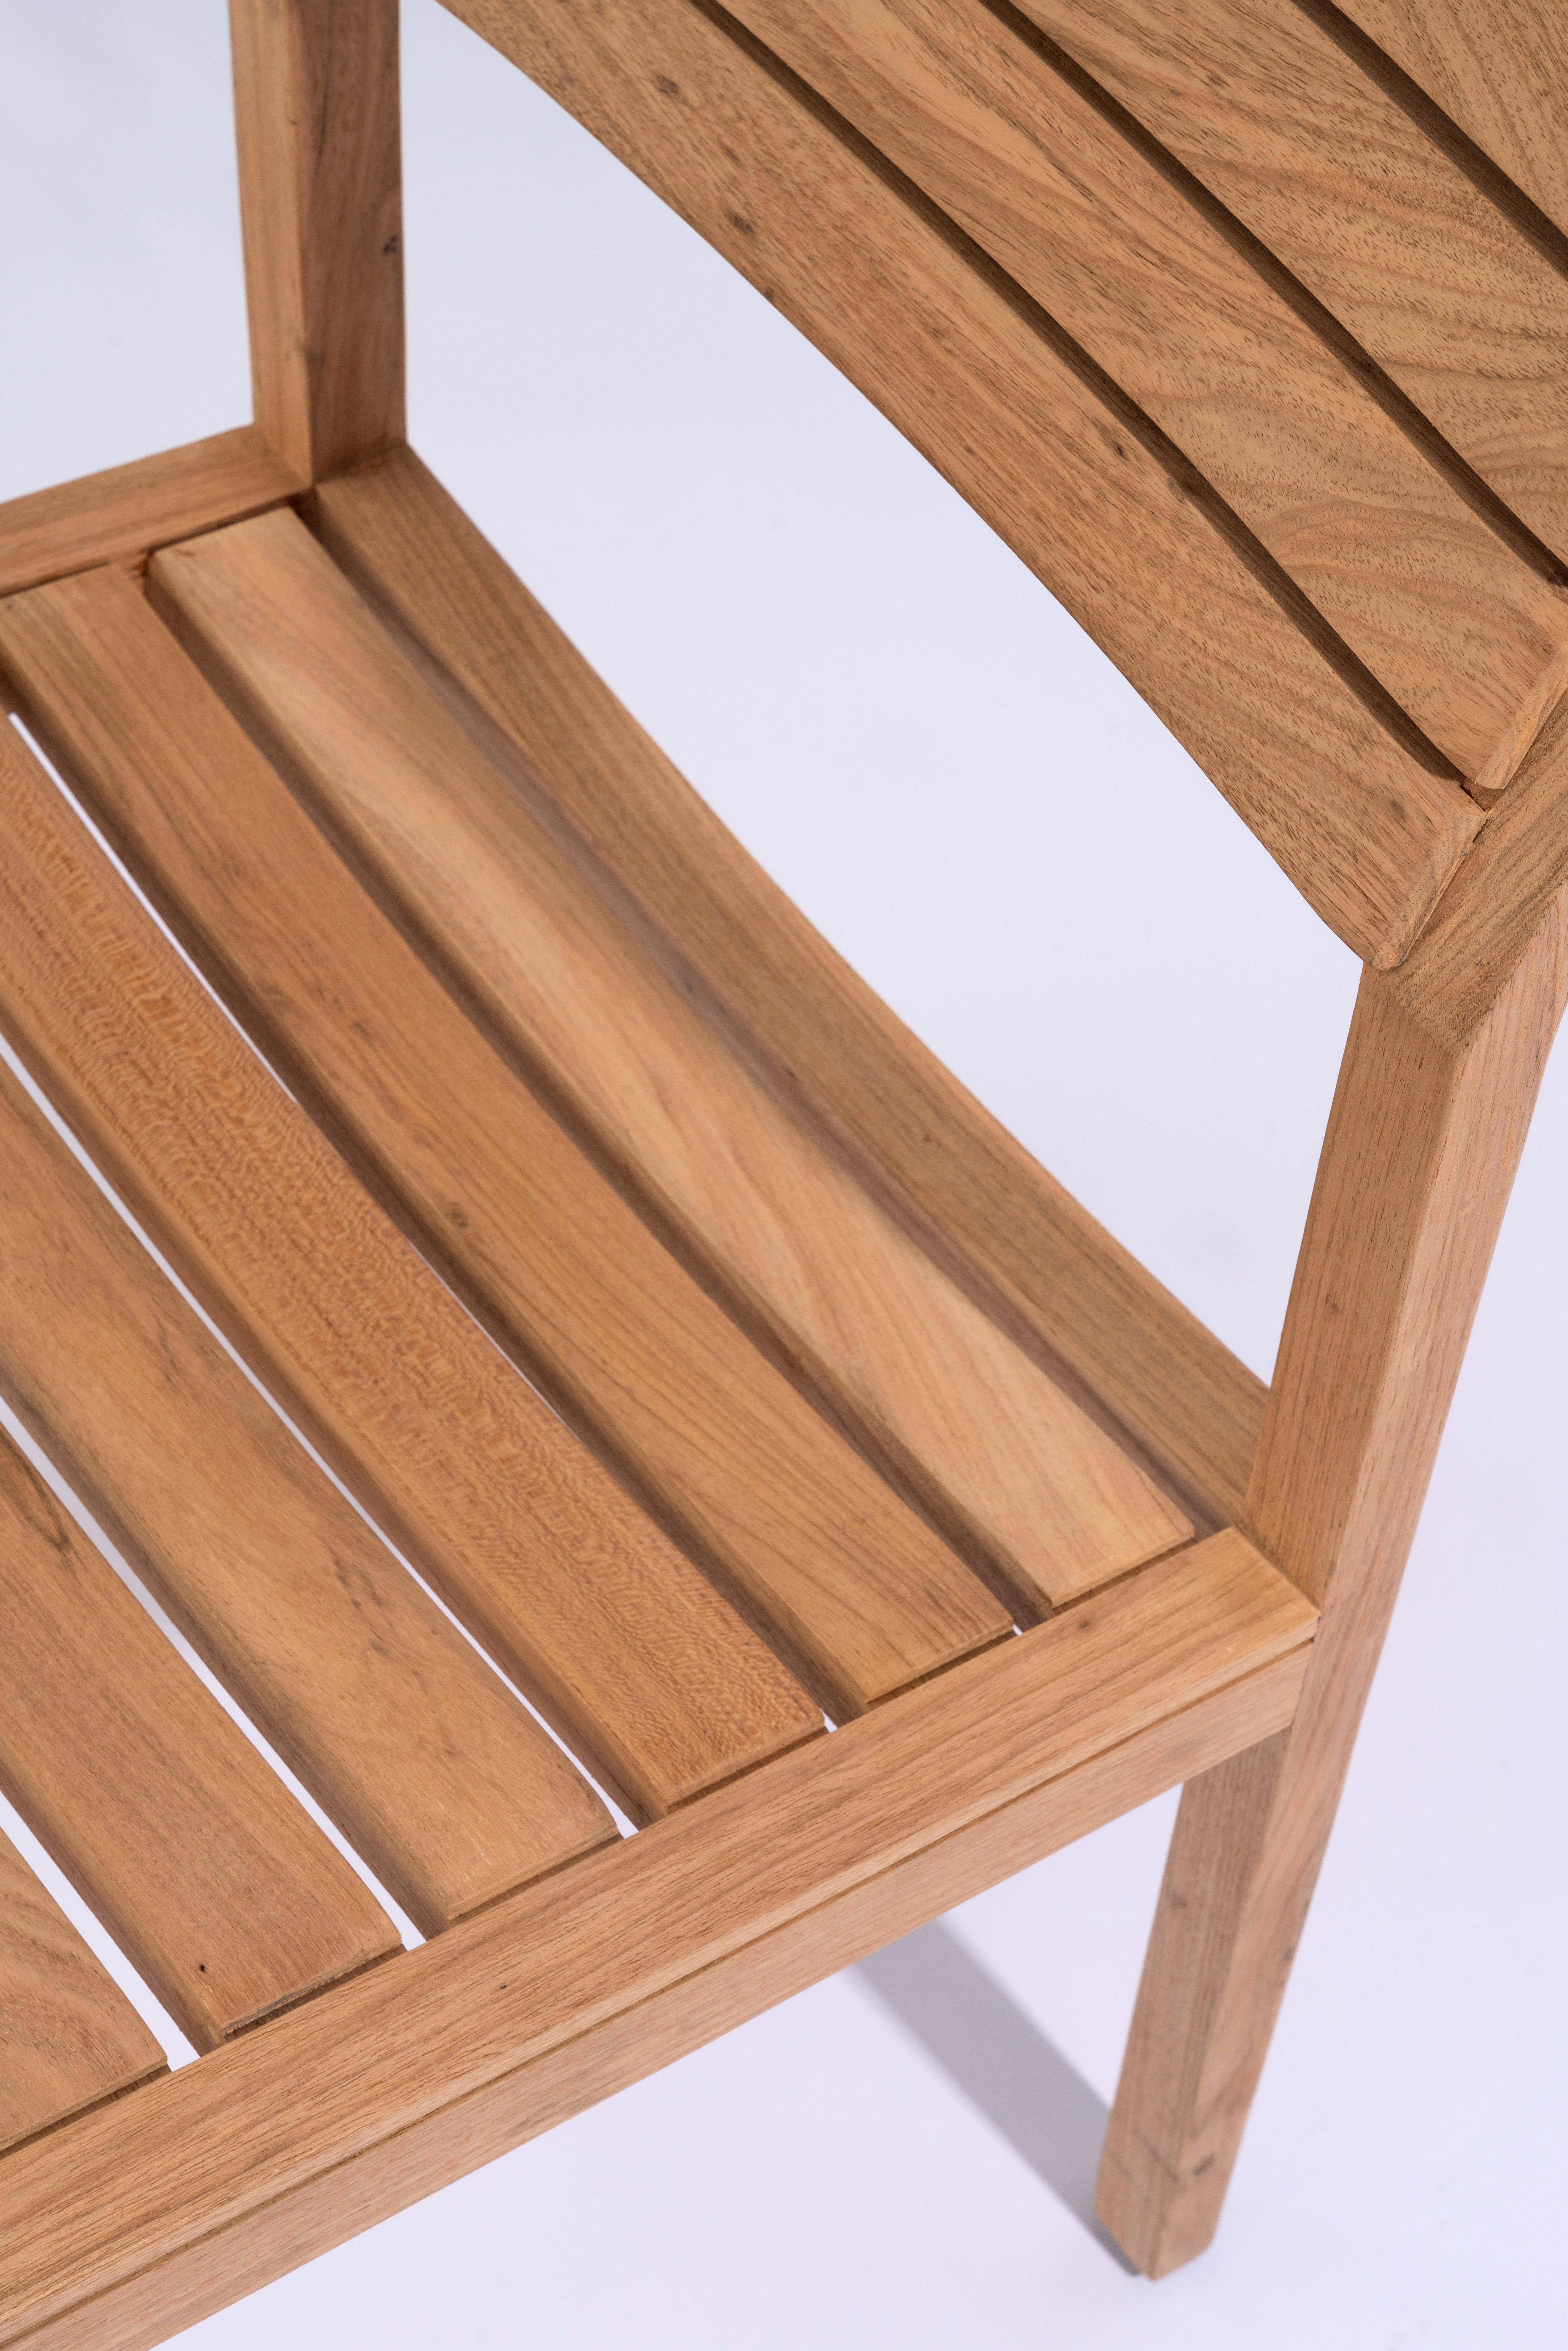 Brazilian Solid Wood Chair in Teak, with Wooden Slats, for the Outside, Outdoor Resistant  For Sale